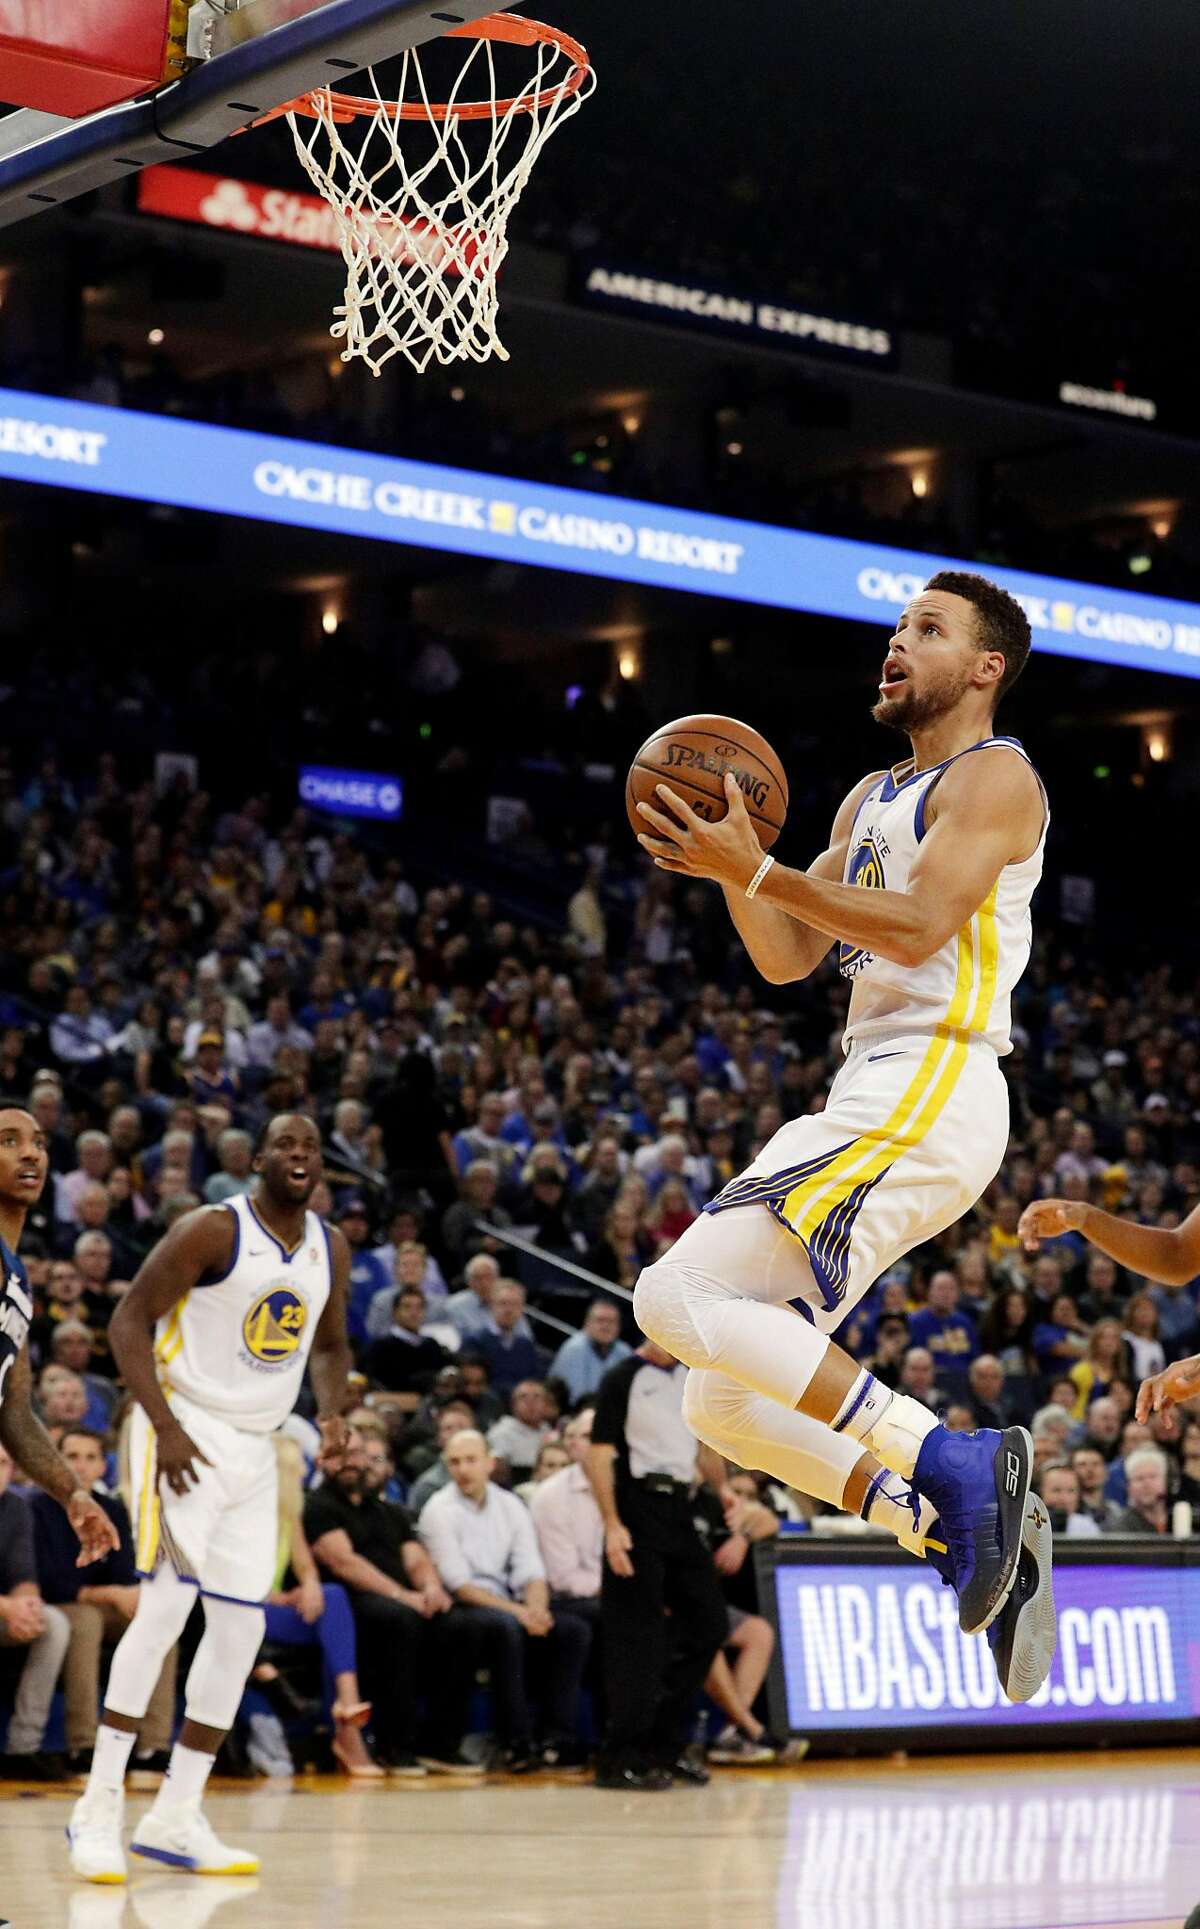 Stephen Curry (30) glides in for a layup in the first half as the Golden State Warriors played the Minnesota Timberwolves at Oracle Arena in Oakland Calif., Wednesday, November 8, 2017.